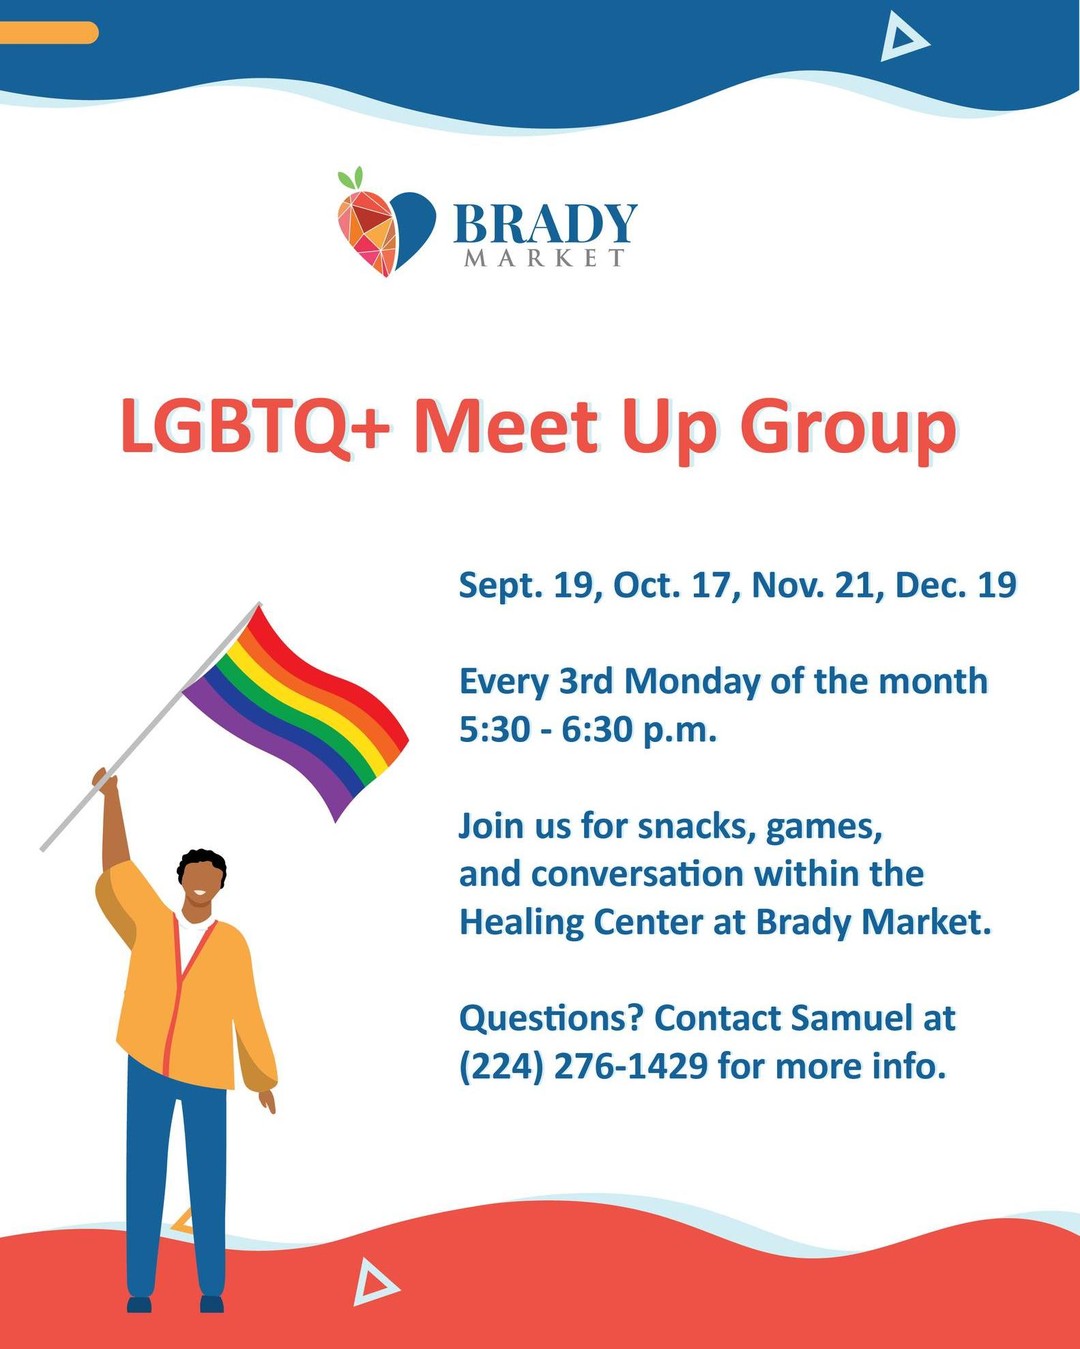 Join the LGBTQ+ Meet Up Group today from 5:30-6:30 p.m. for a snacks, games, and conversations here in the Healing Center at Brady Market!

We'll be here the third Monday of every month. 

#morethanamarket